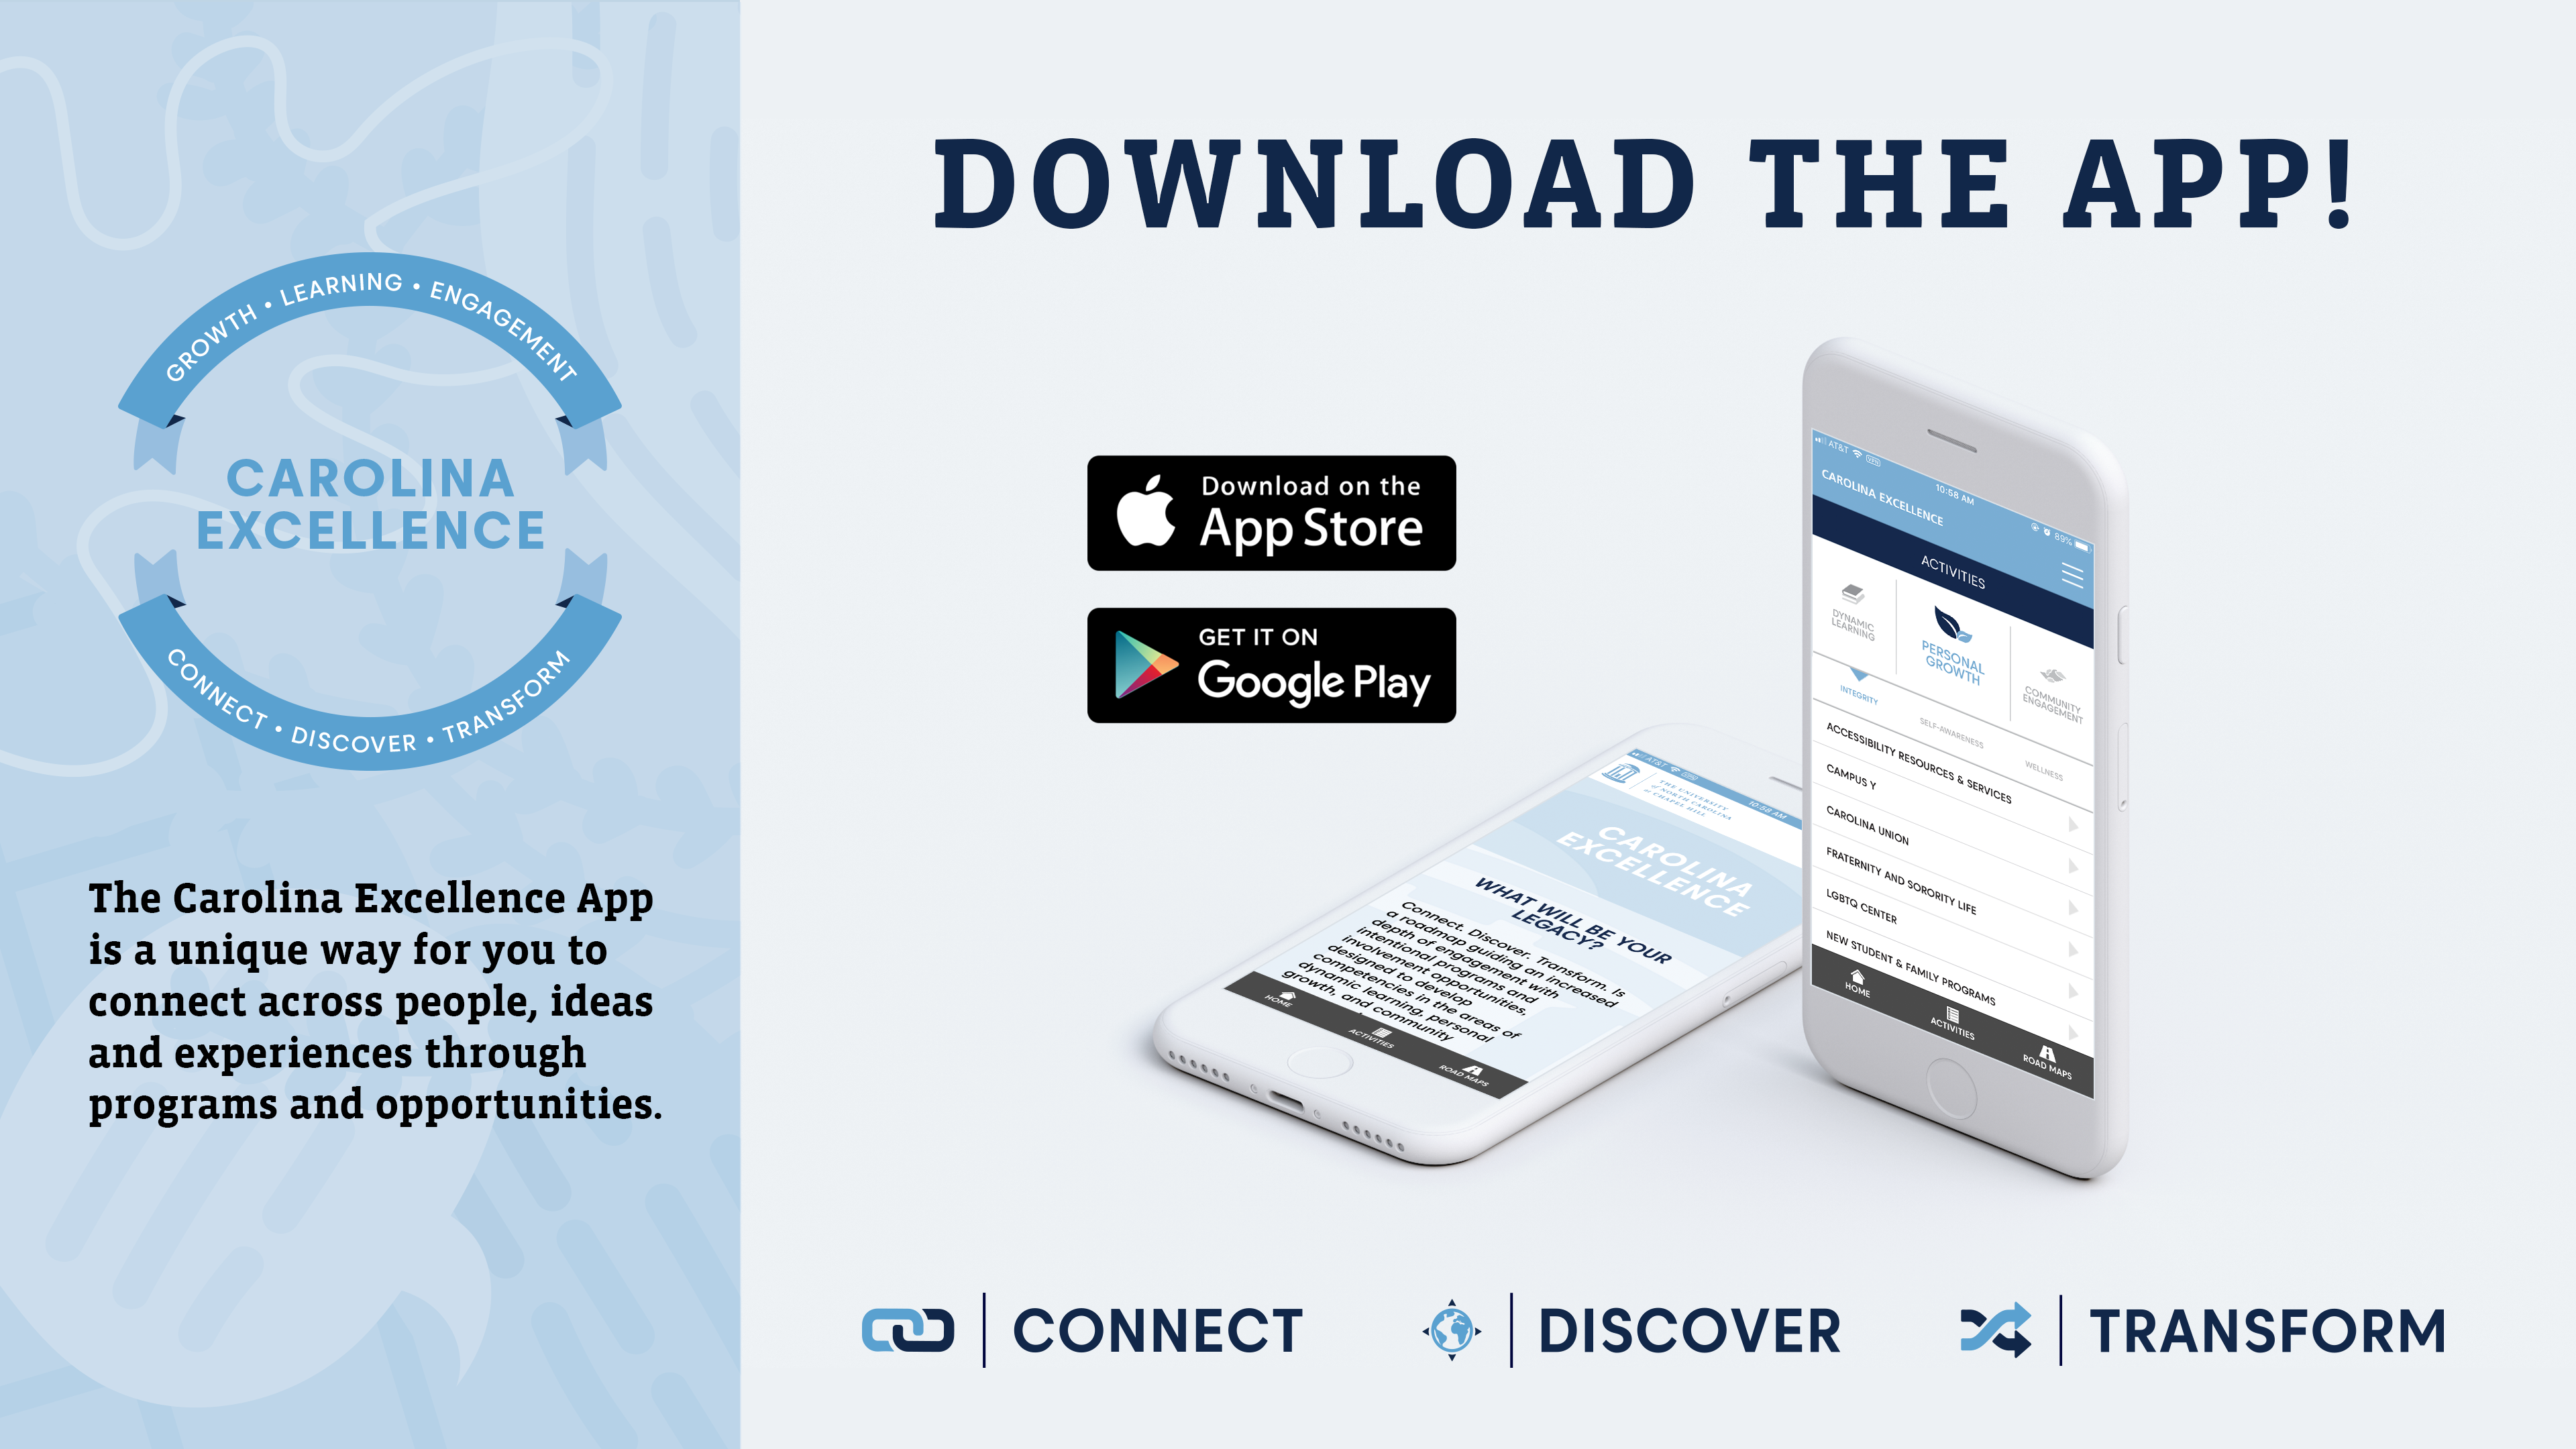 Download the Carolina Excellence app to connect through programs and opportunities 